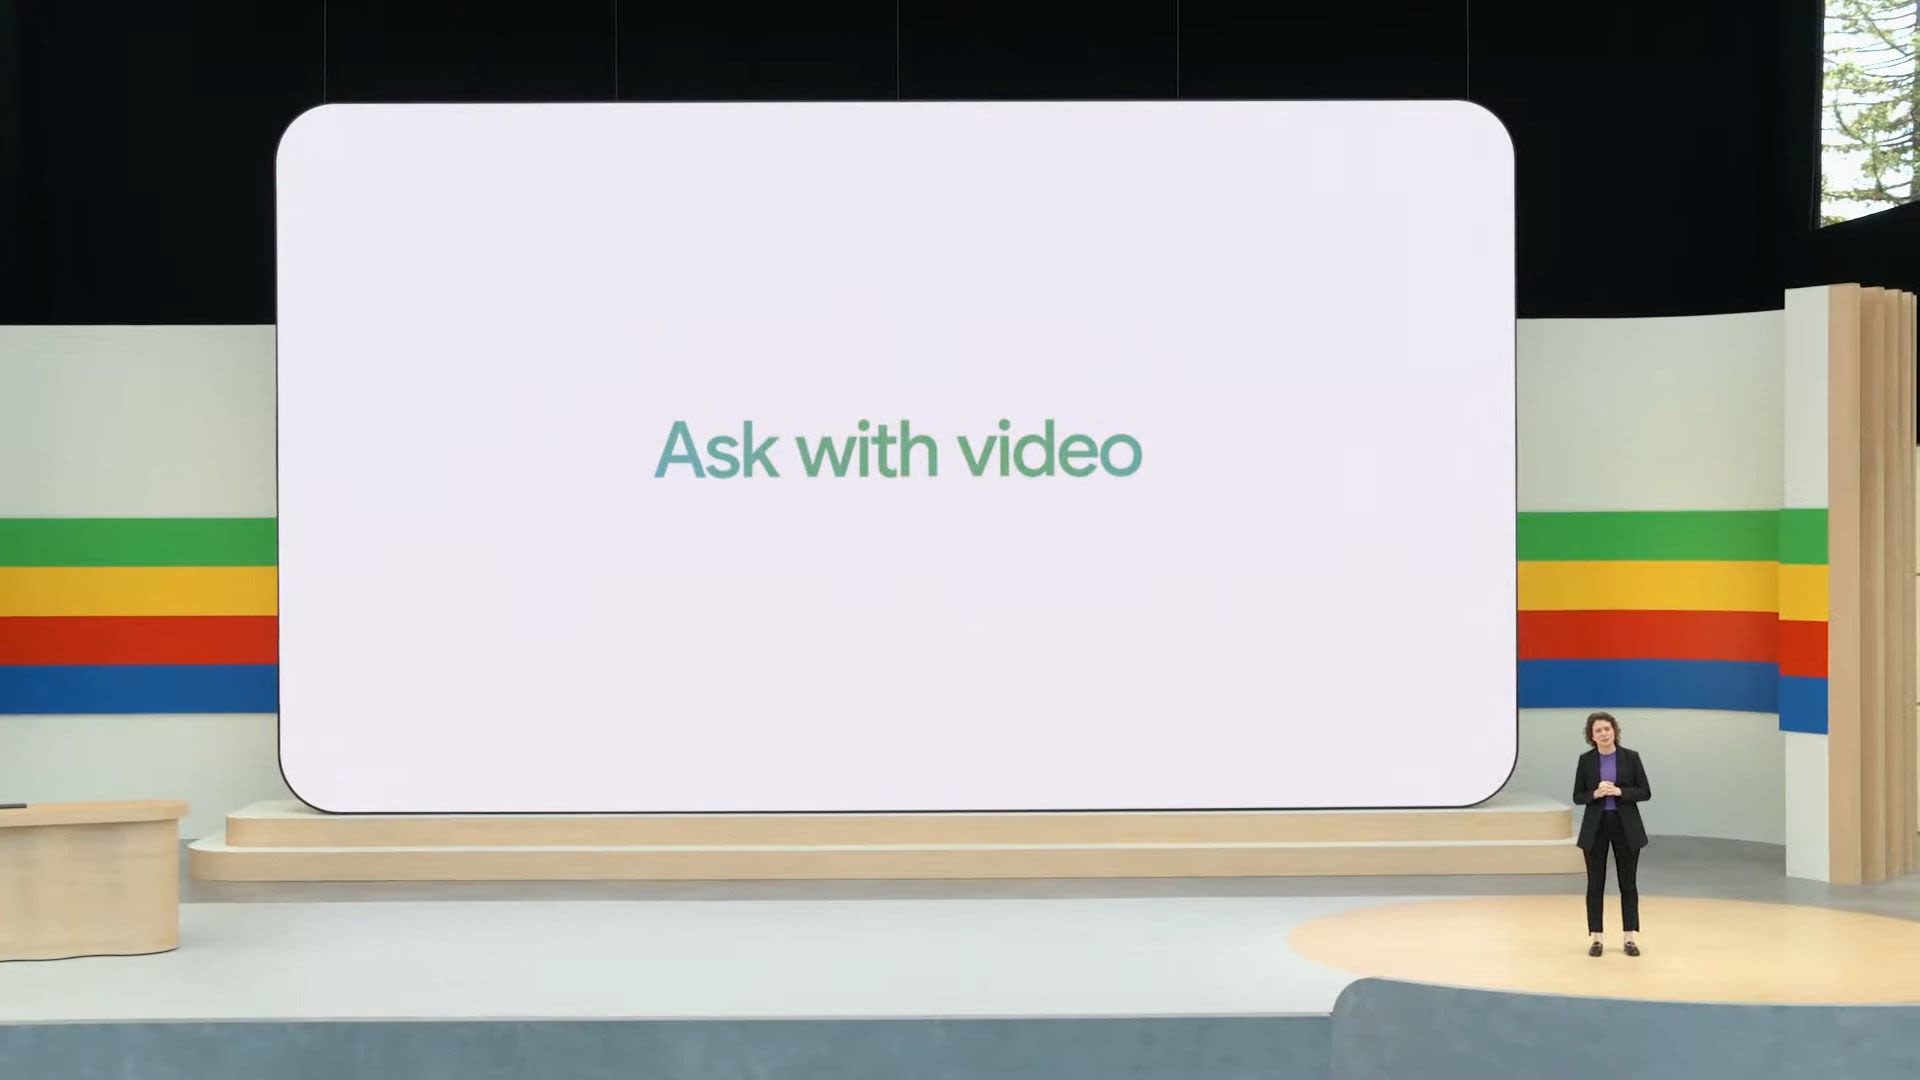 Google's new 'Ask with video' feature uses Gemini AI to interact with the real world